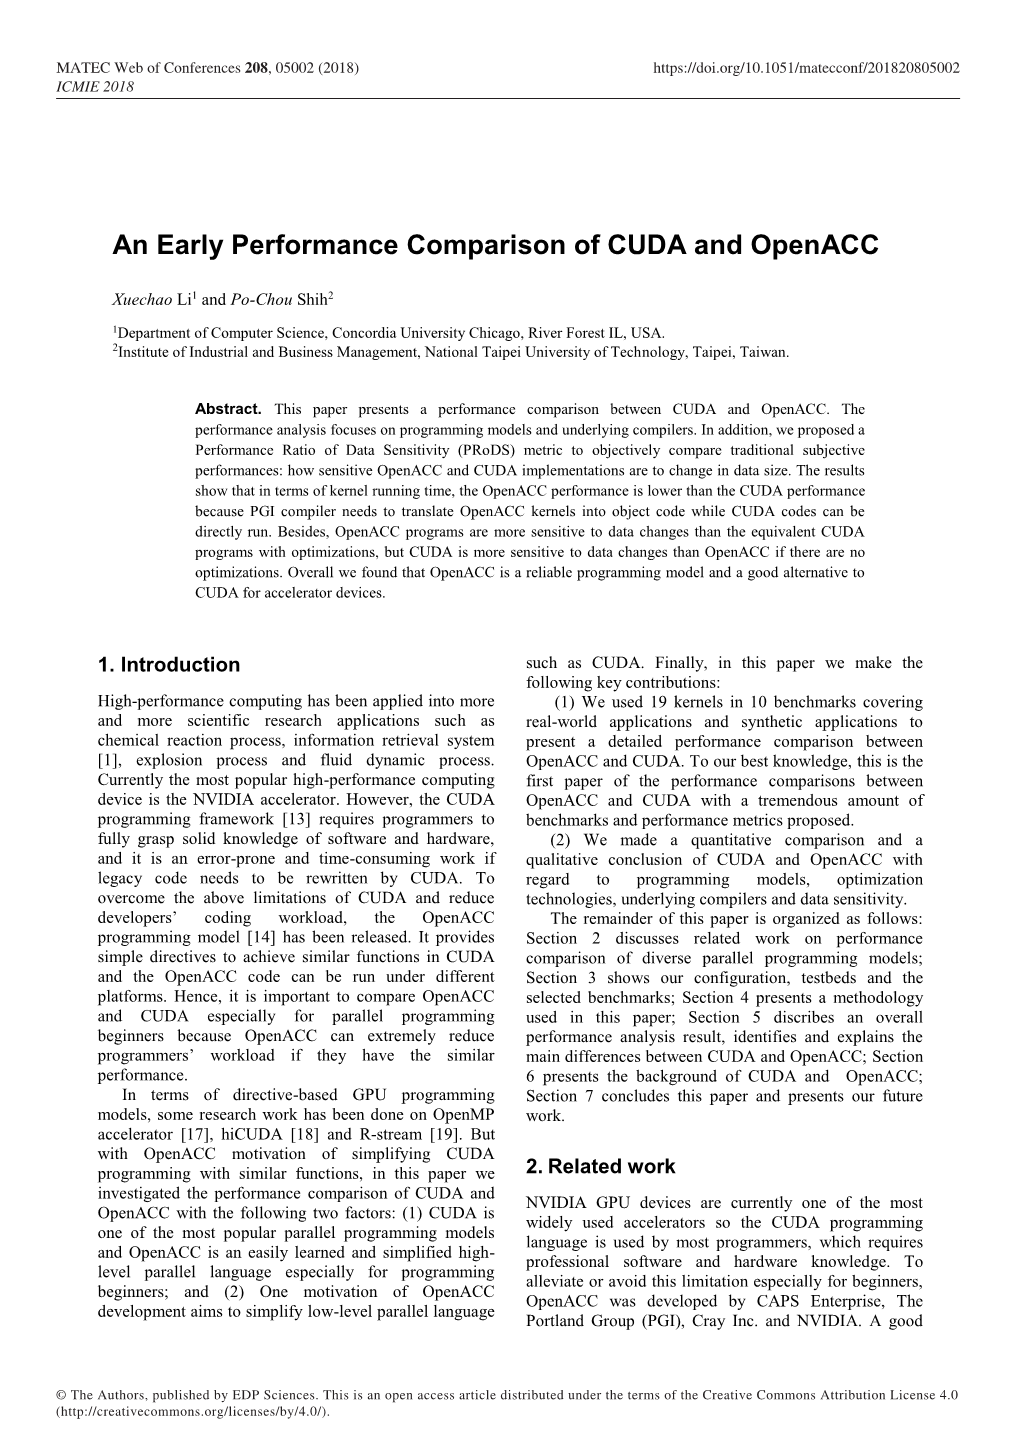 An Early Performance Comparison of CUDA and Openacc